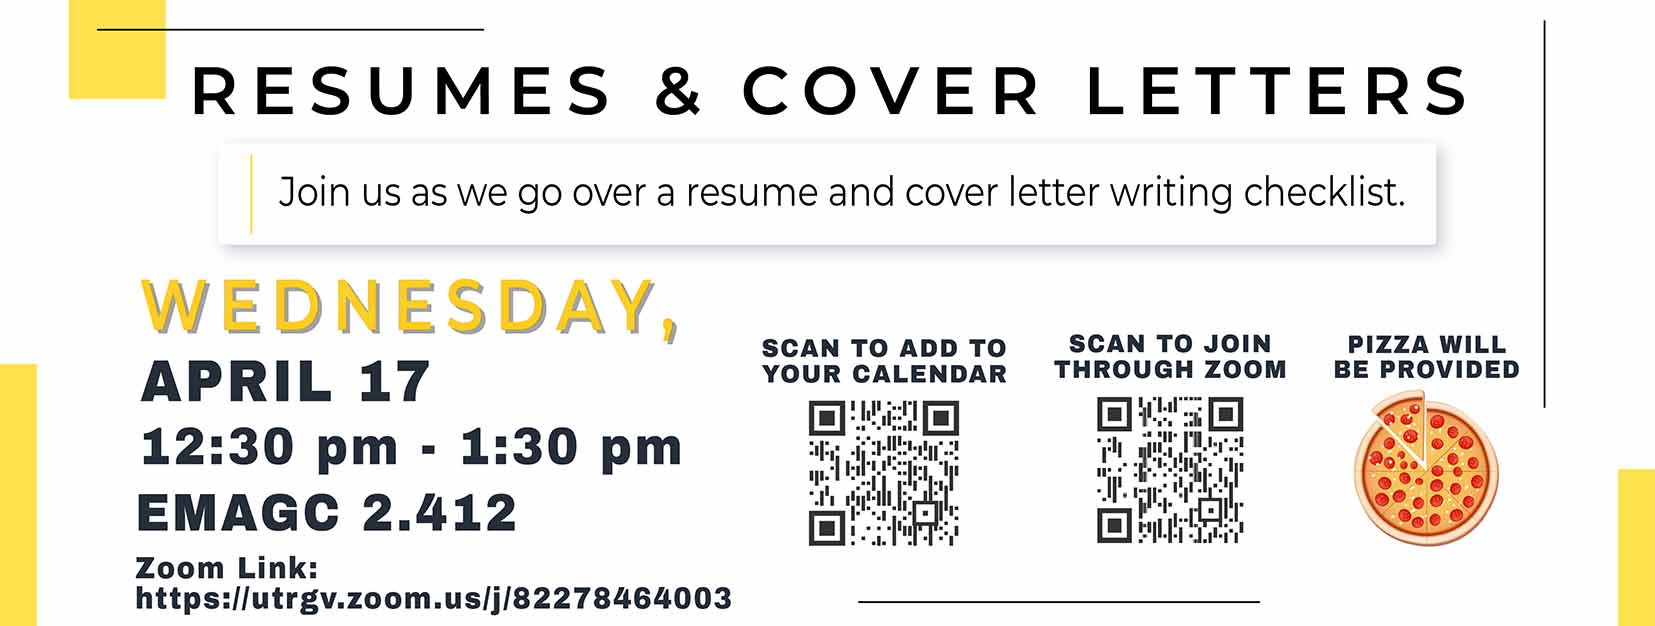 resumes-and-cover-letters-workshop